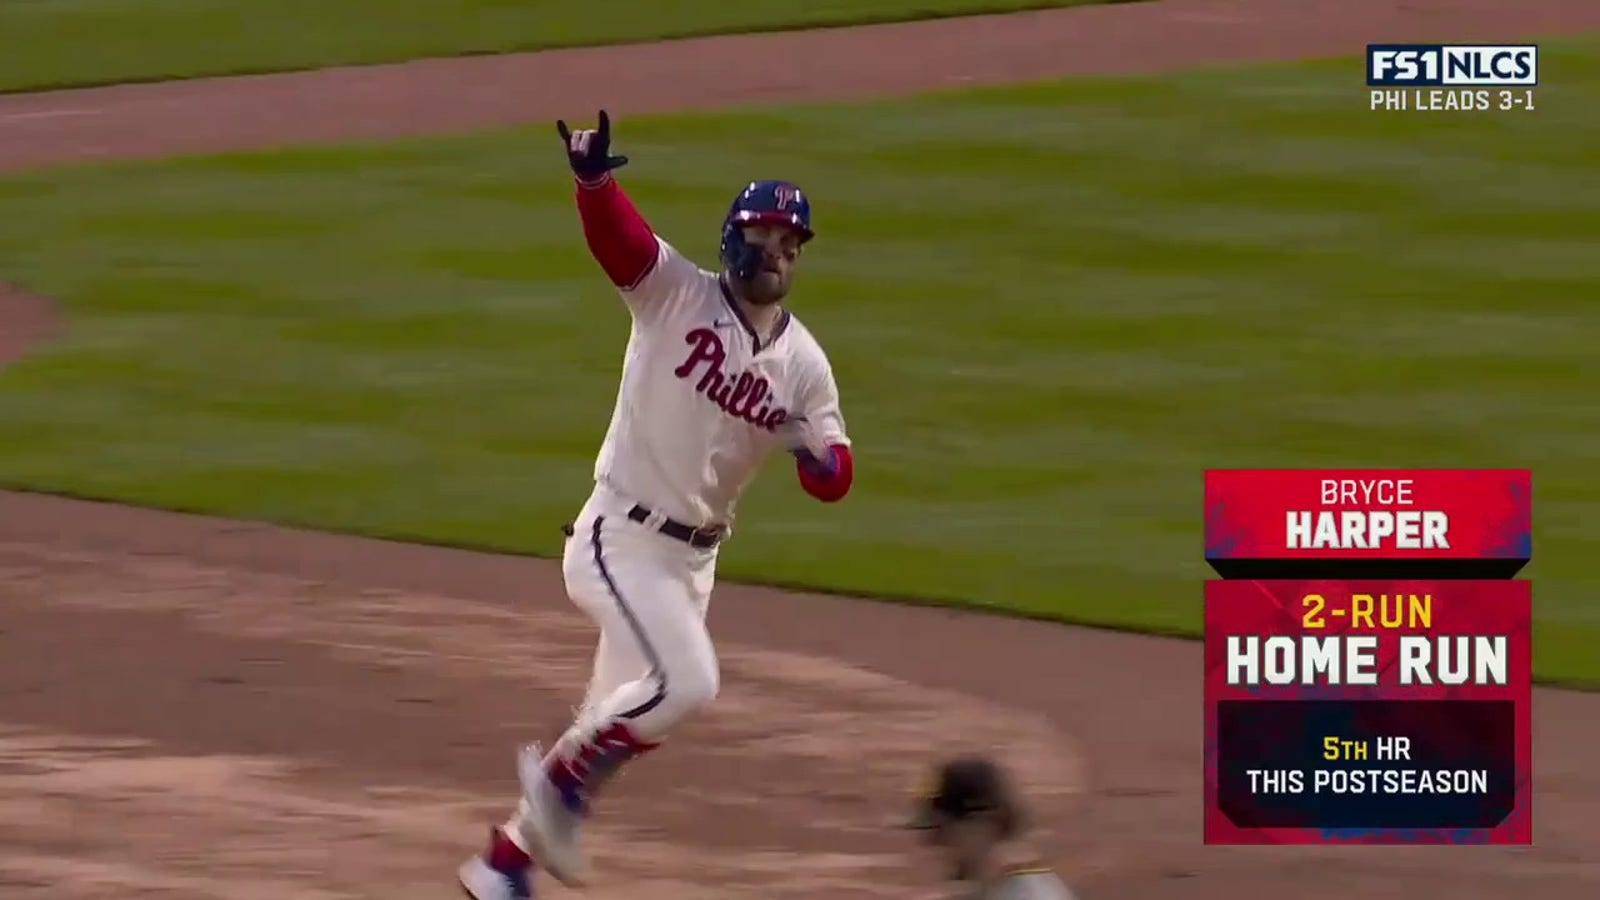 Bryce Harper launches a two-run home run to give Phillies a lead